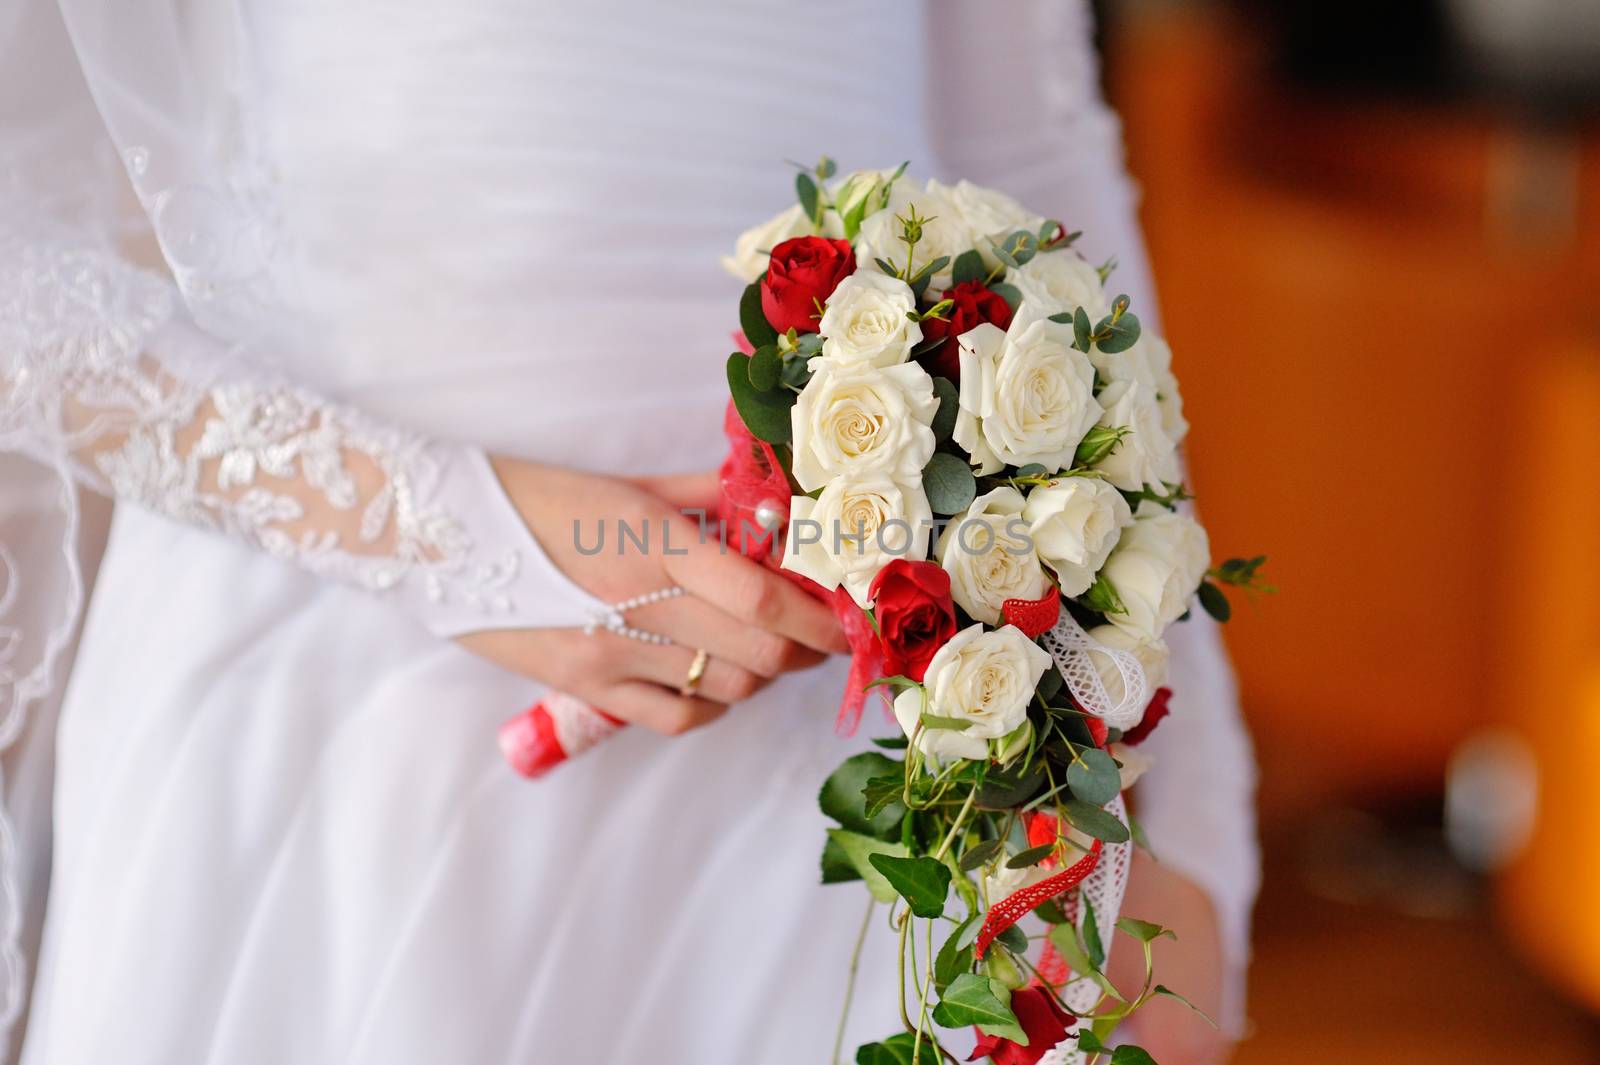 wedding bouquet at bride's hands by timonko